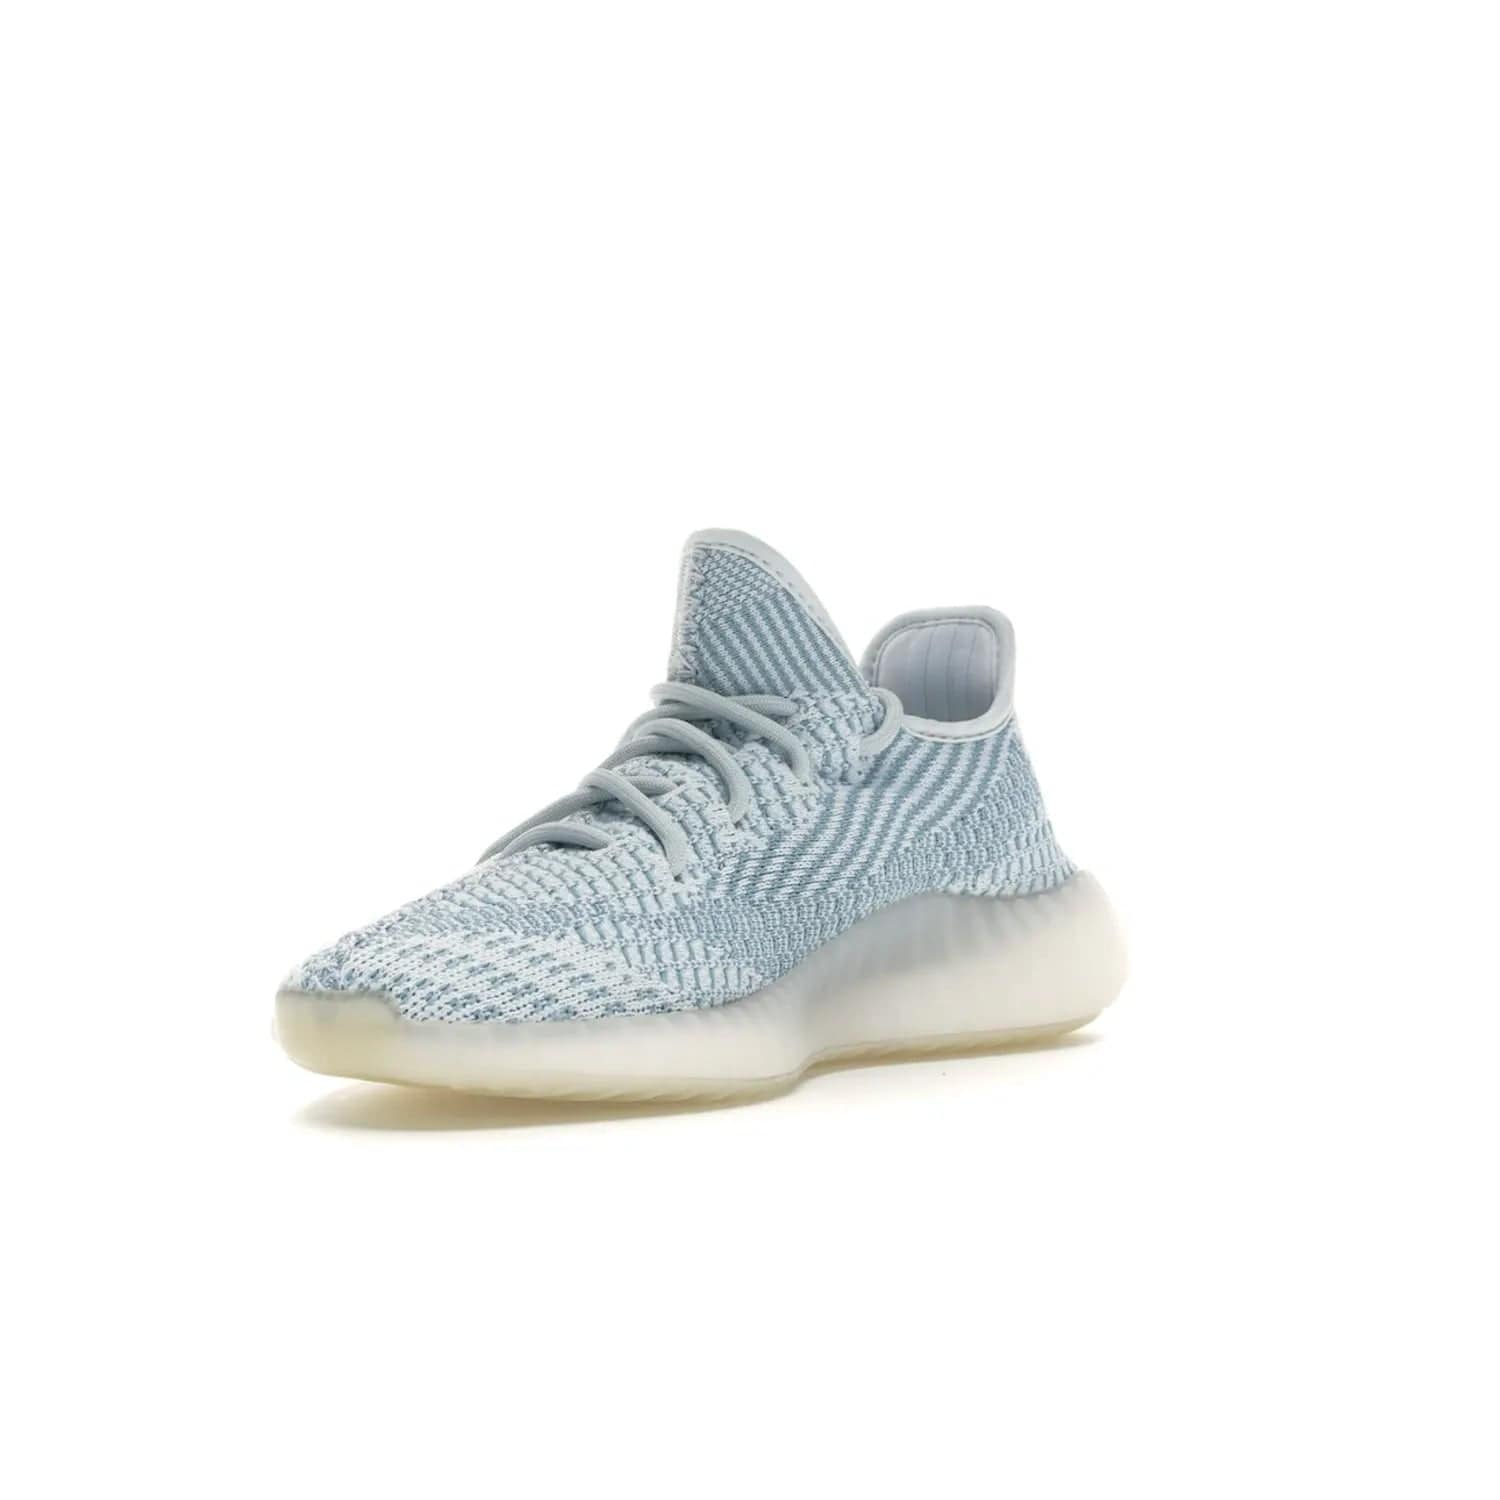 adidas Yeezy Boost 350 V2 Cloud White (Non-Reflective) - Image 14 - Only at www.BallersClubKickz.com - Adidas Yeezy Boost 350 V2 Cloud White (Non-Reflective) features Primeknit fabric and a unique, eye-catching design of cream, bluish-white, and transparent strip. Step out in timeless style with this eye-catching sneaker.